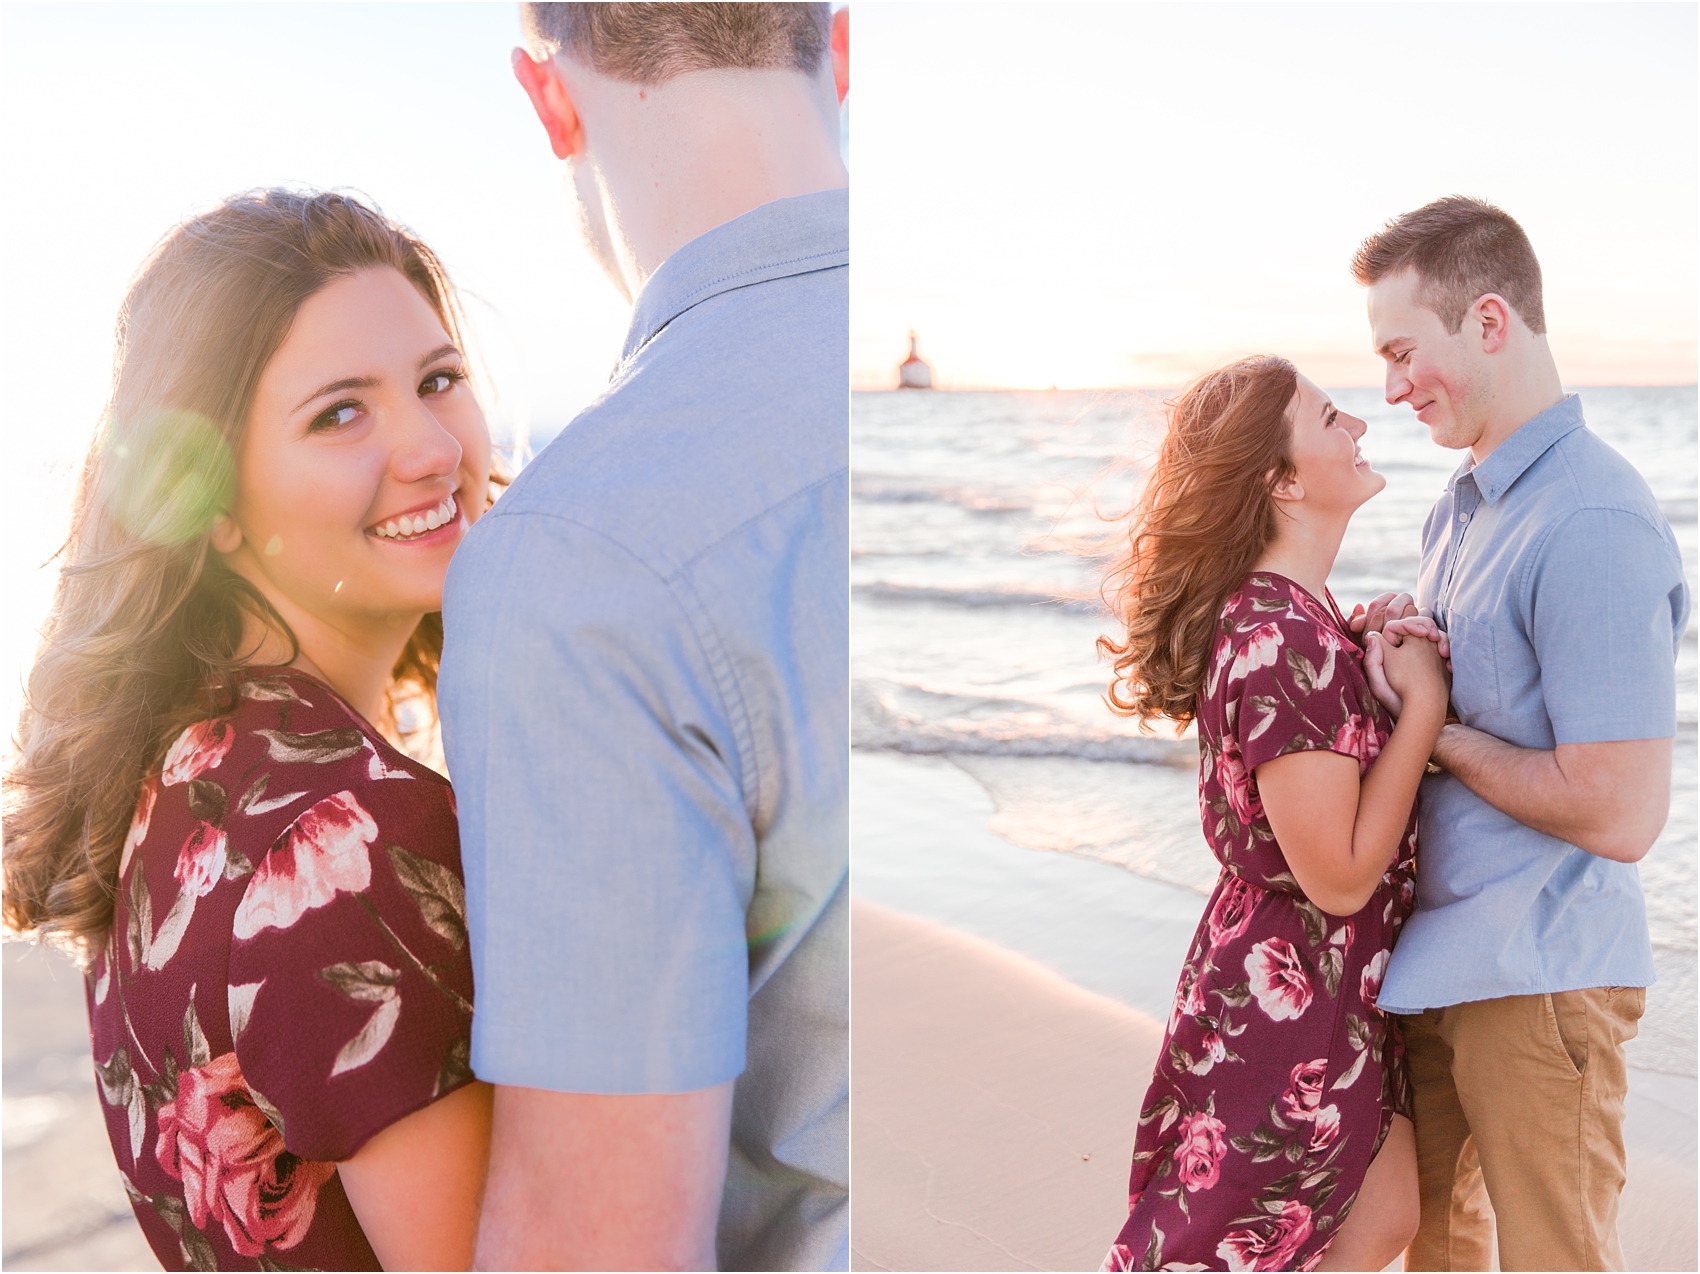 candid-end-of-summer-sunset-engagement-photos-at-silver-beach-in-st-joseph-mi-by-courtney-carolyn-photography_0026.jpg